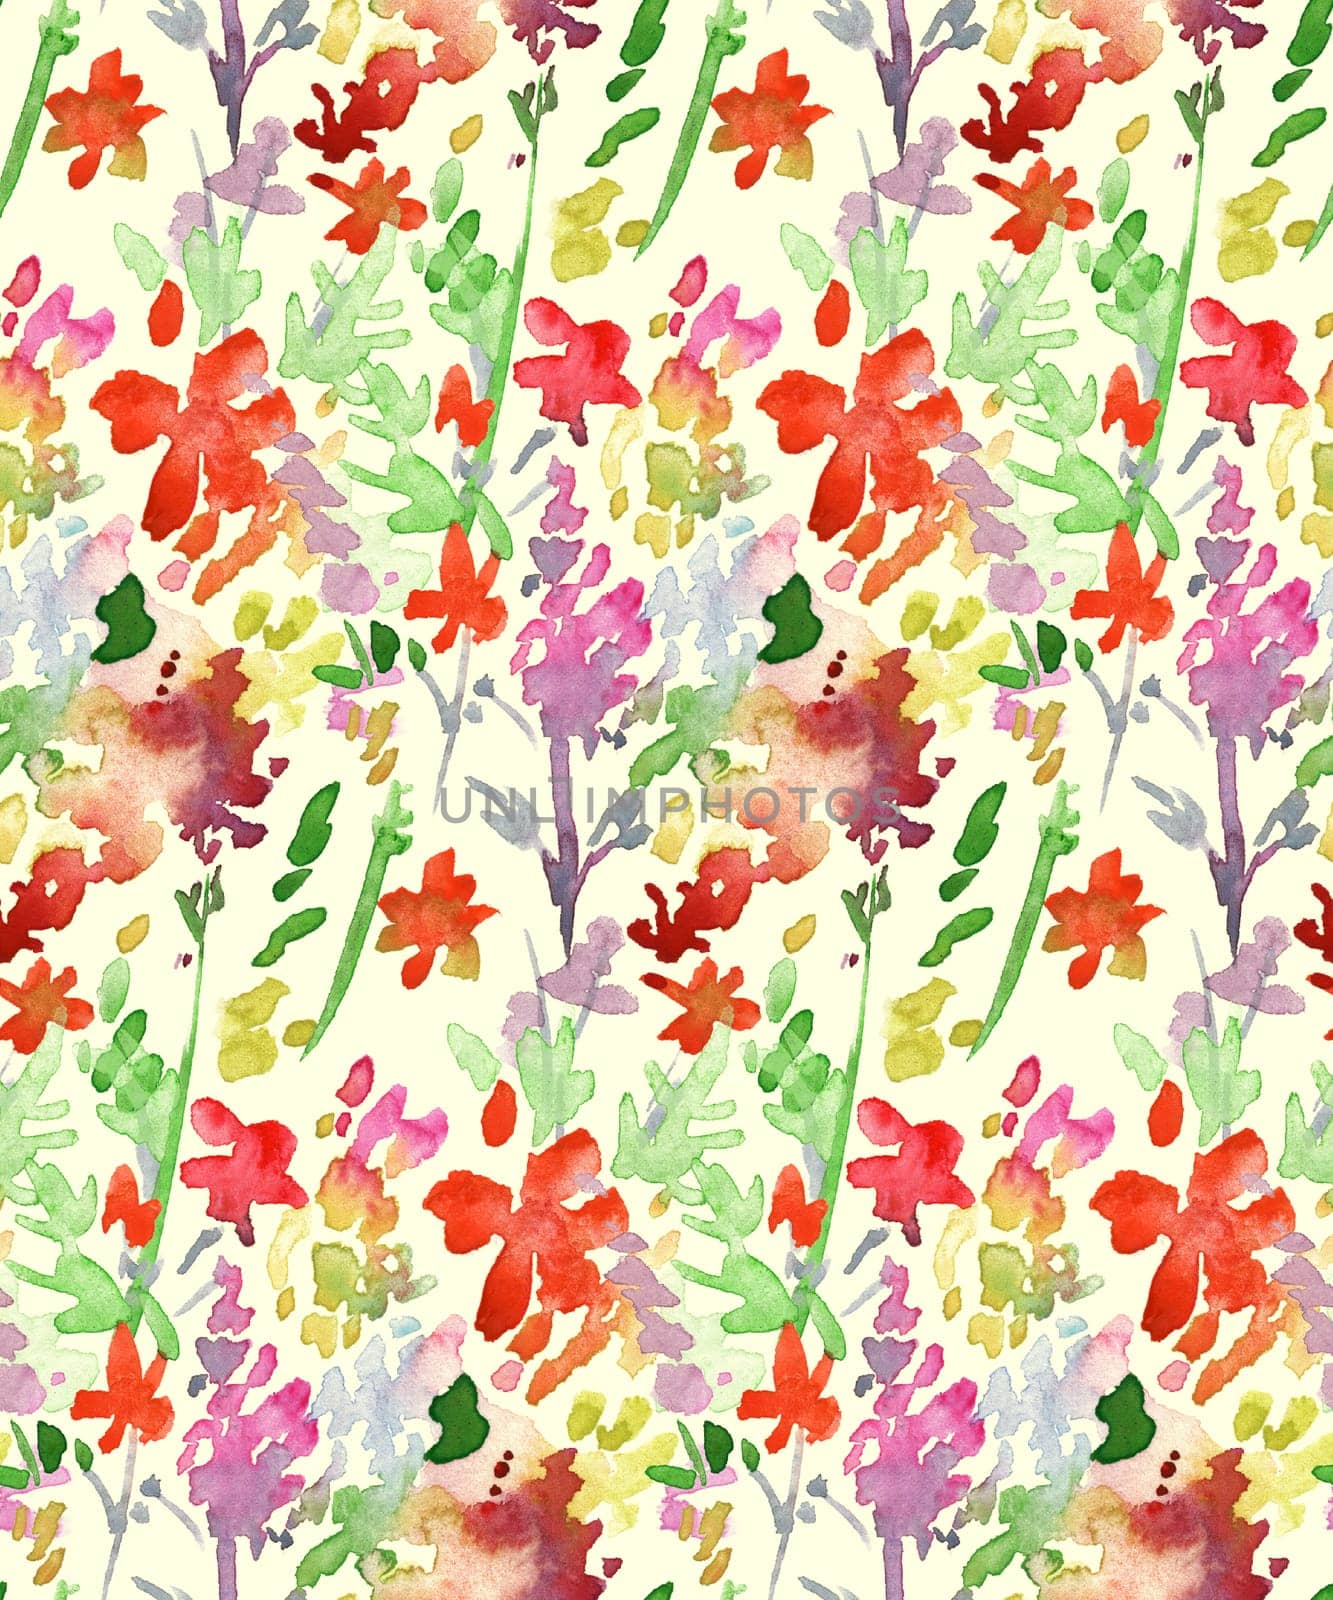 fashion floral multicolored summer pattern with wildflowers and plants for womens textiles painted in watercolor